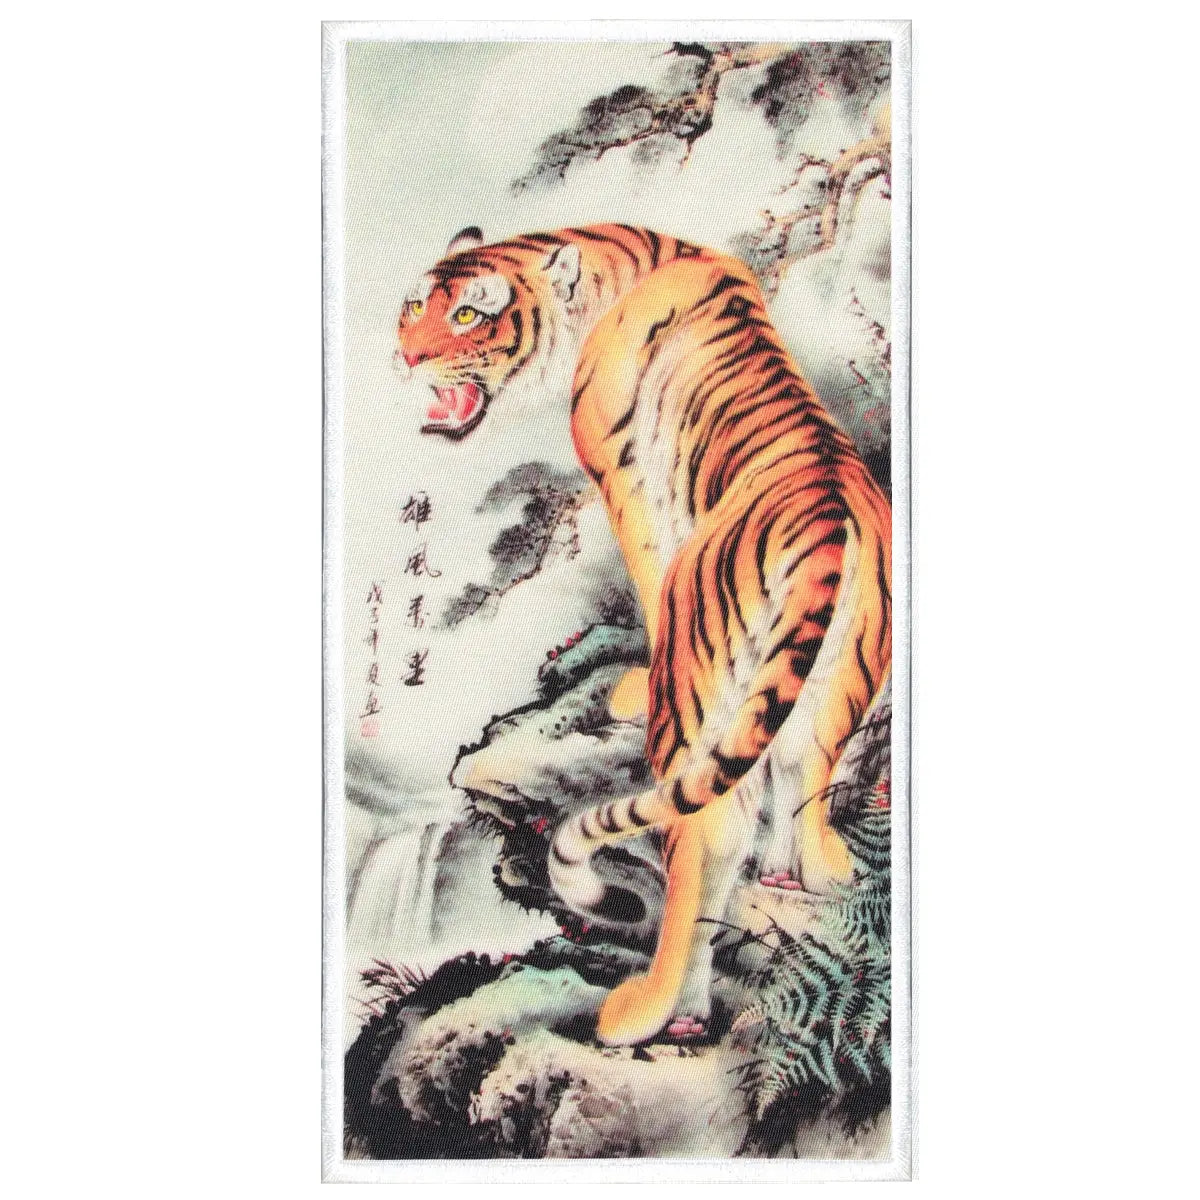 Japanese Art Tiger Scene FotoPatch Jacket XL Embroidered Iron-on 